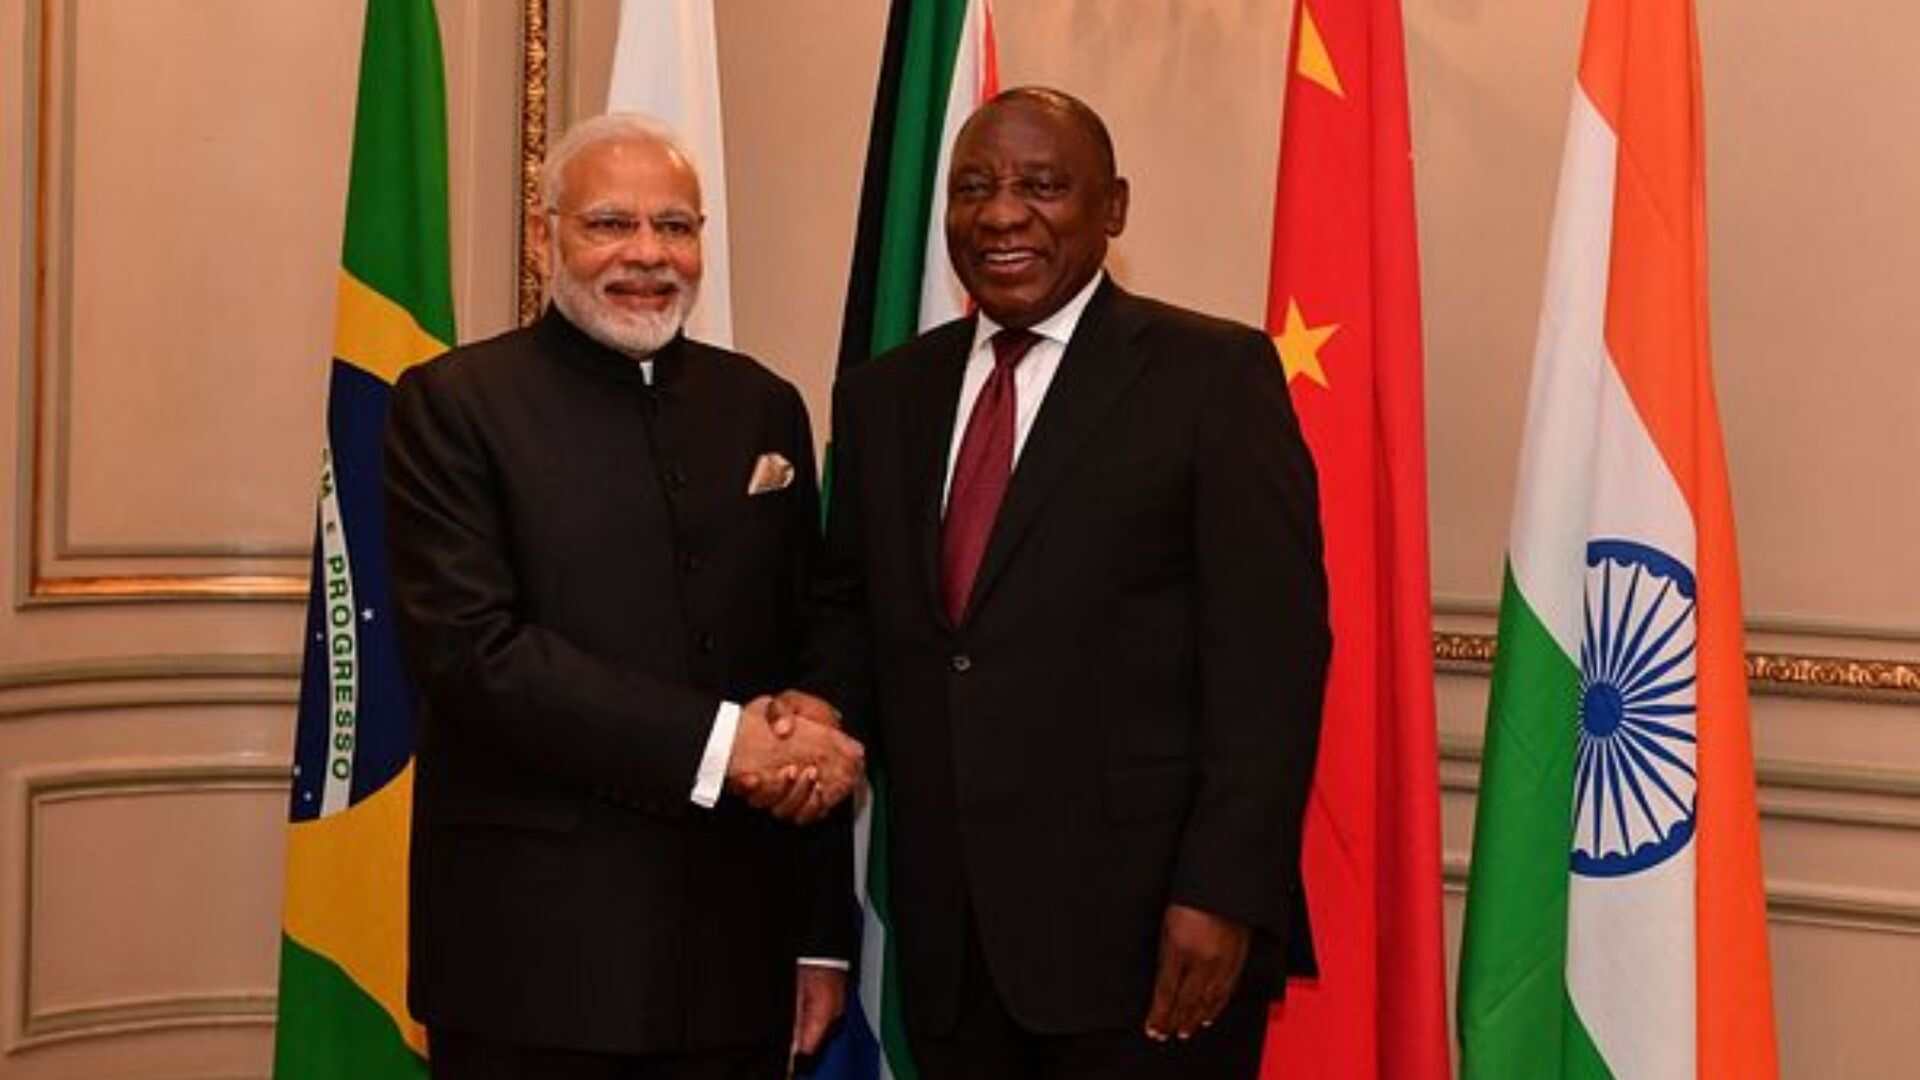 India To Promote South African Relations In MSME Sector: Delhi Meeting With Namibia And Lesotho